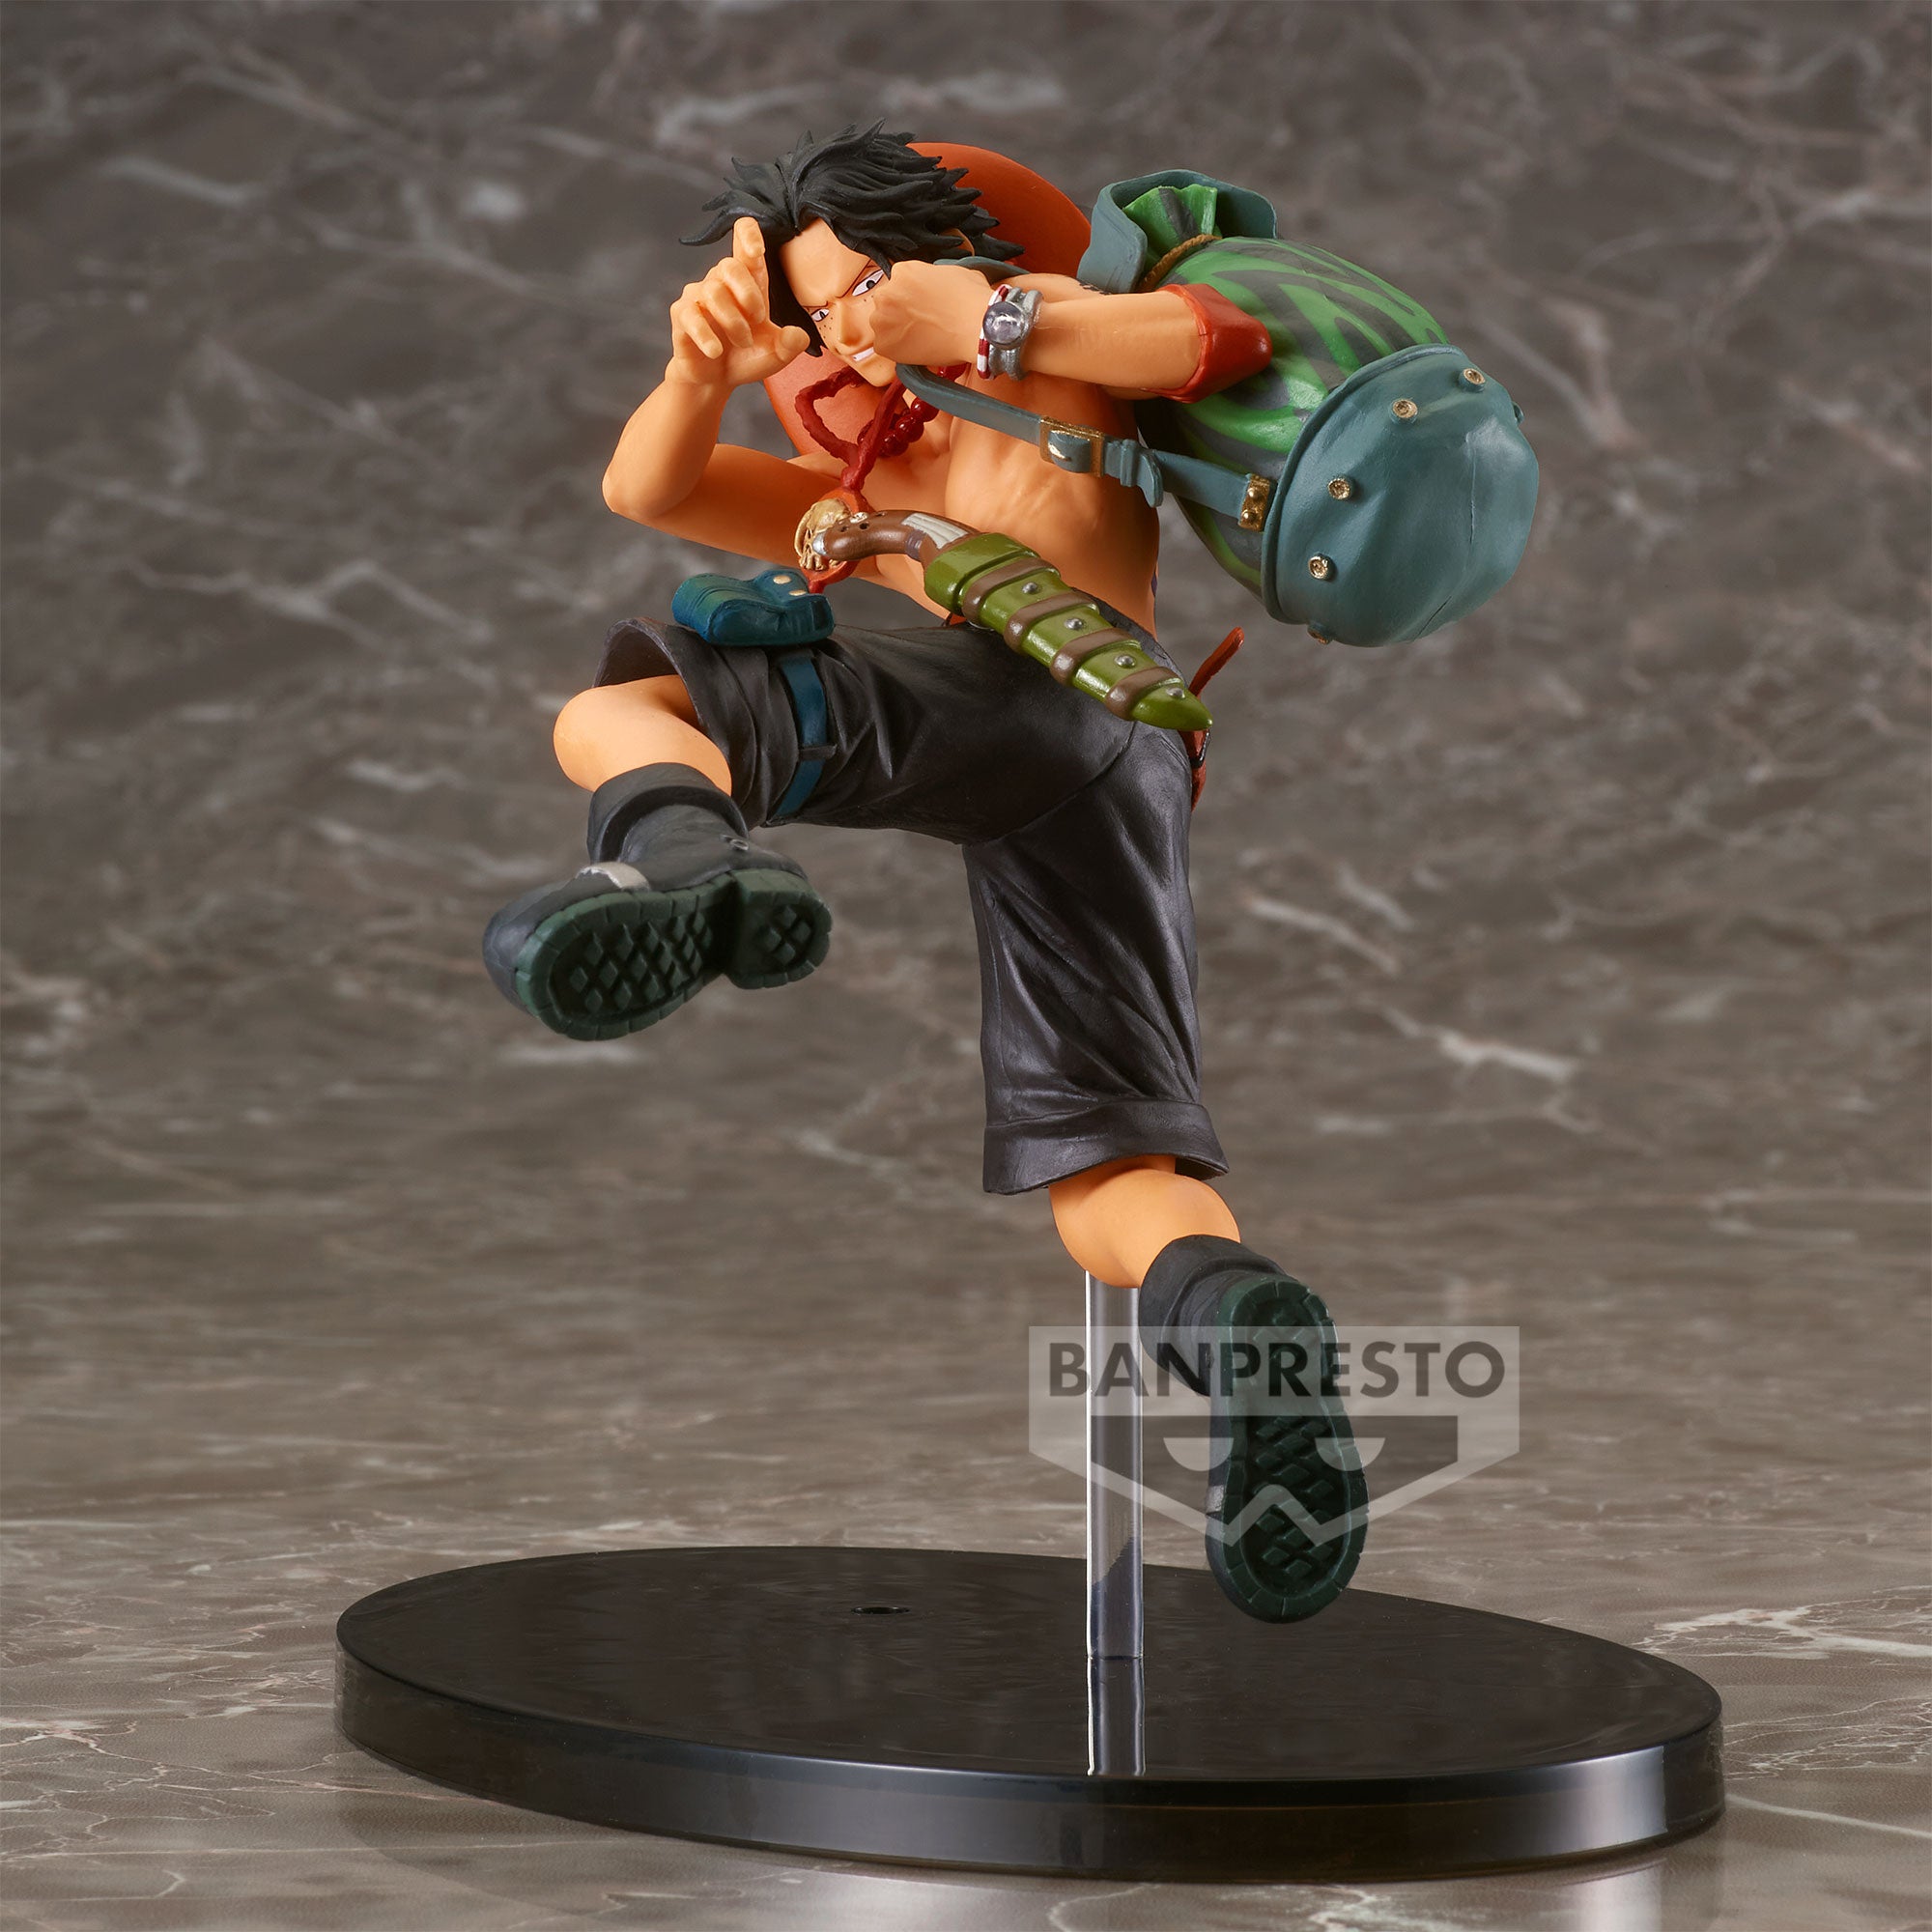 One Piece Anime Figures, One Piece Anime Heroes Figures, Anime Figure Statue  PVC Anime Model Figure Doll Ornaments Statue Super Figure Collection Action  Toy for Desktop Decorations : Amazon.com.au: Toys & Games